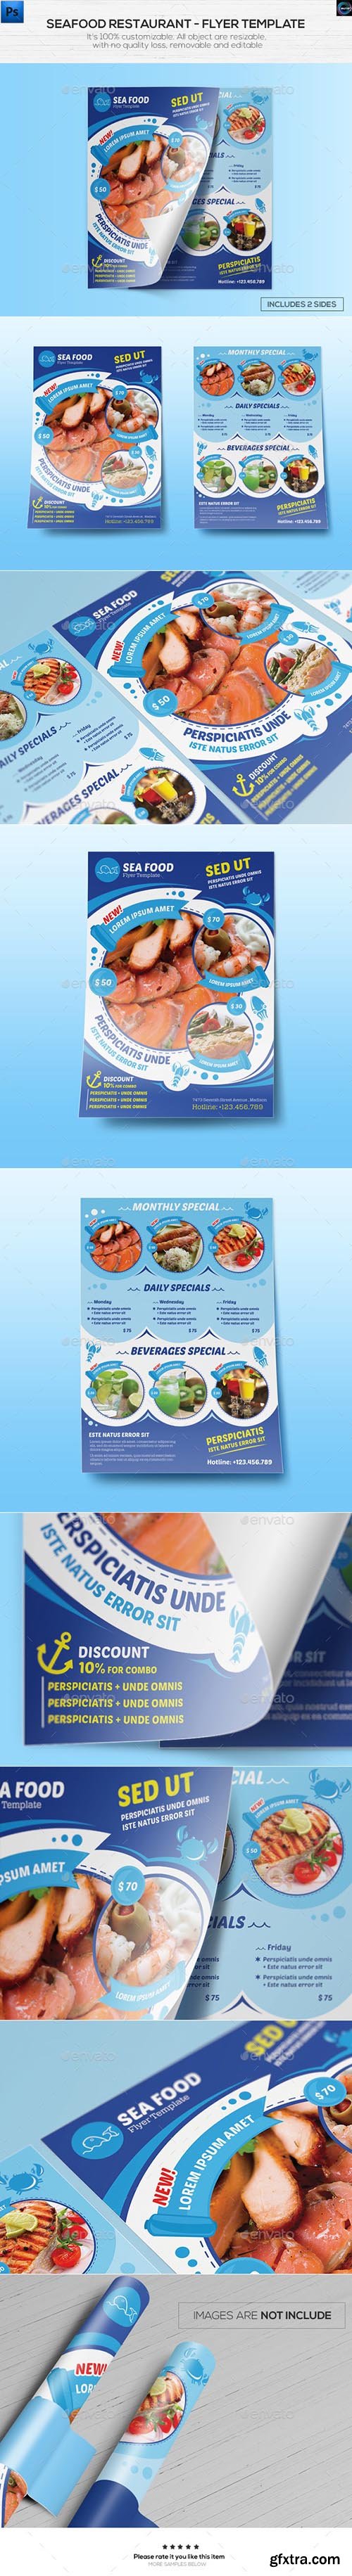 Graphicriver Seafood Restaurant - Flyer Template 12340002